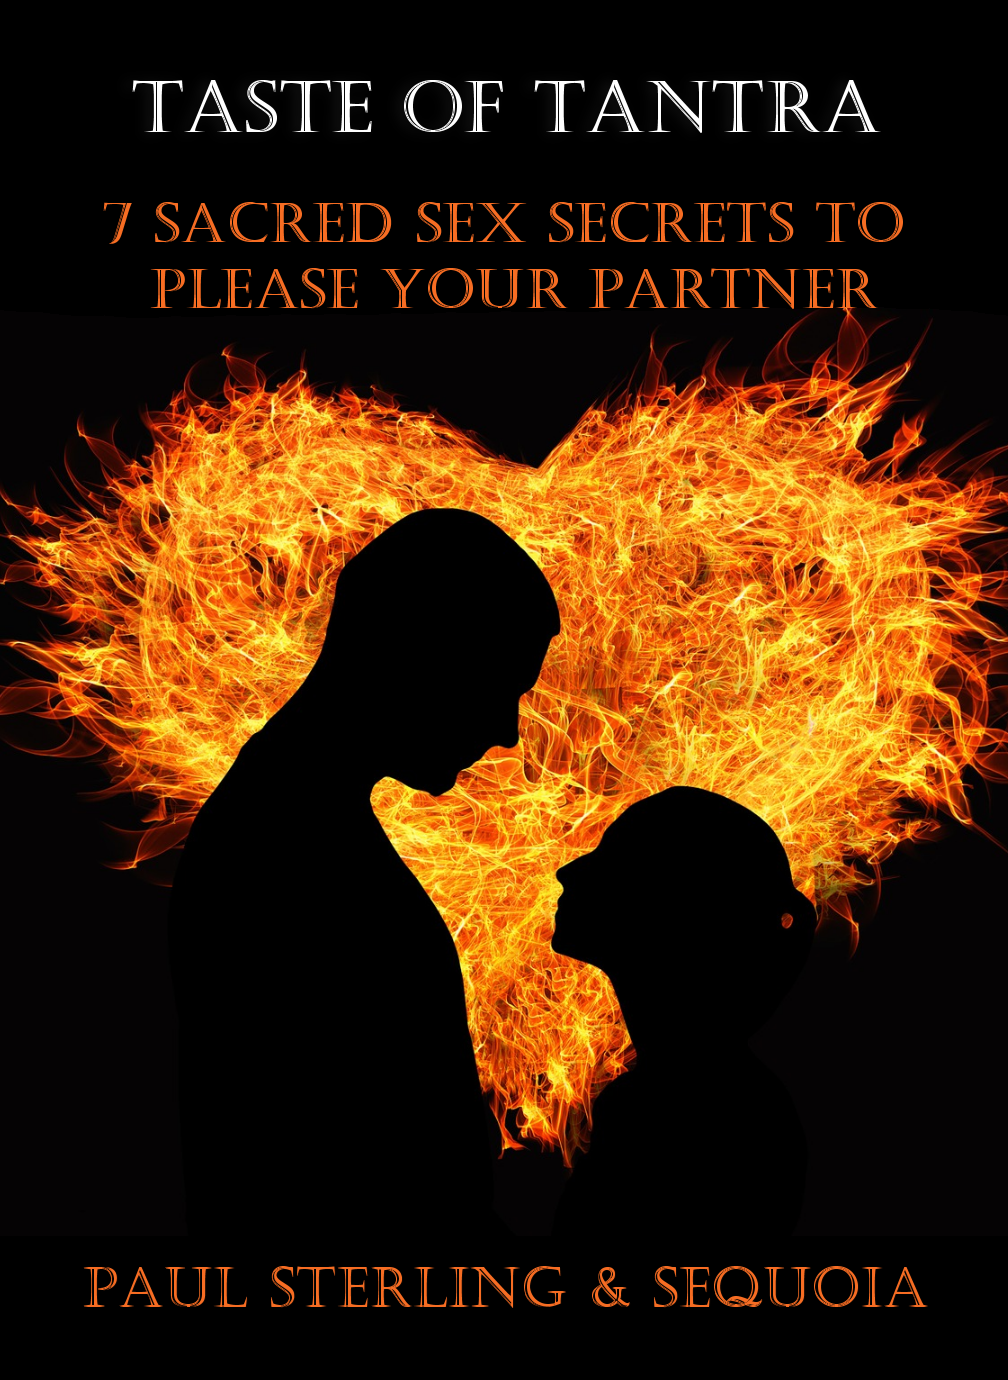 The tantric secrets of sacred sex